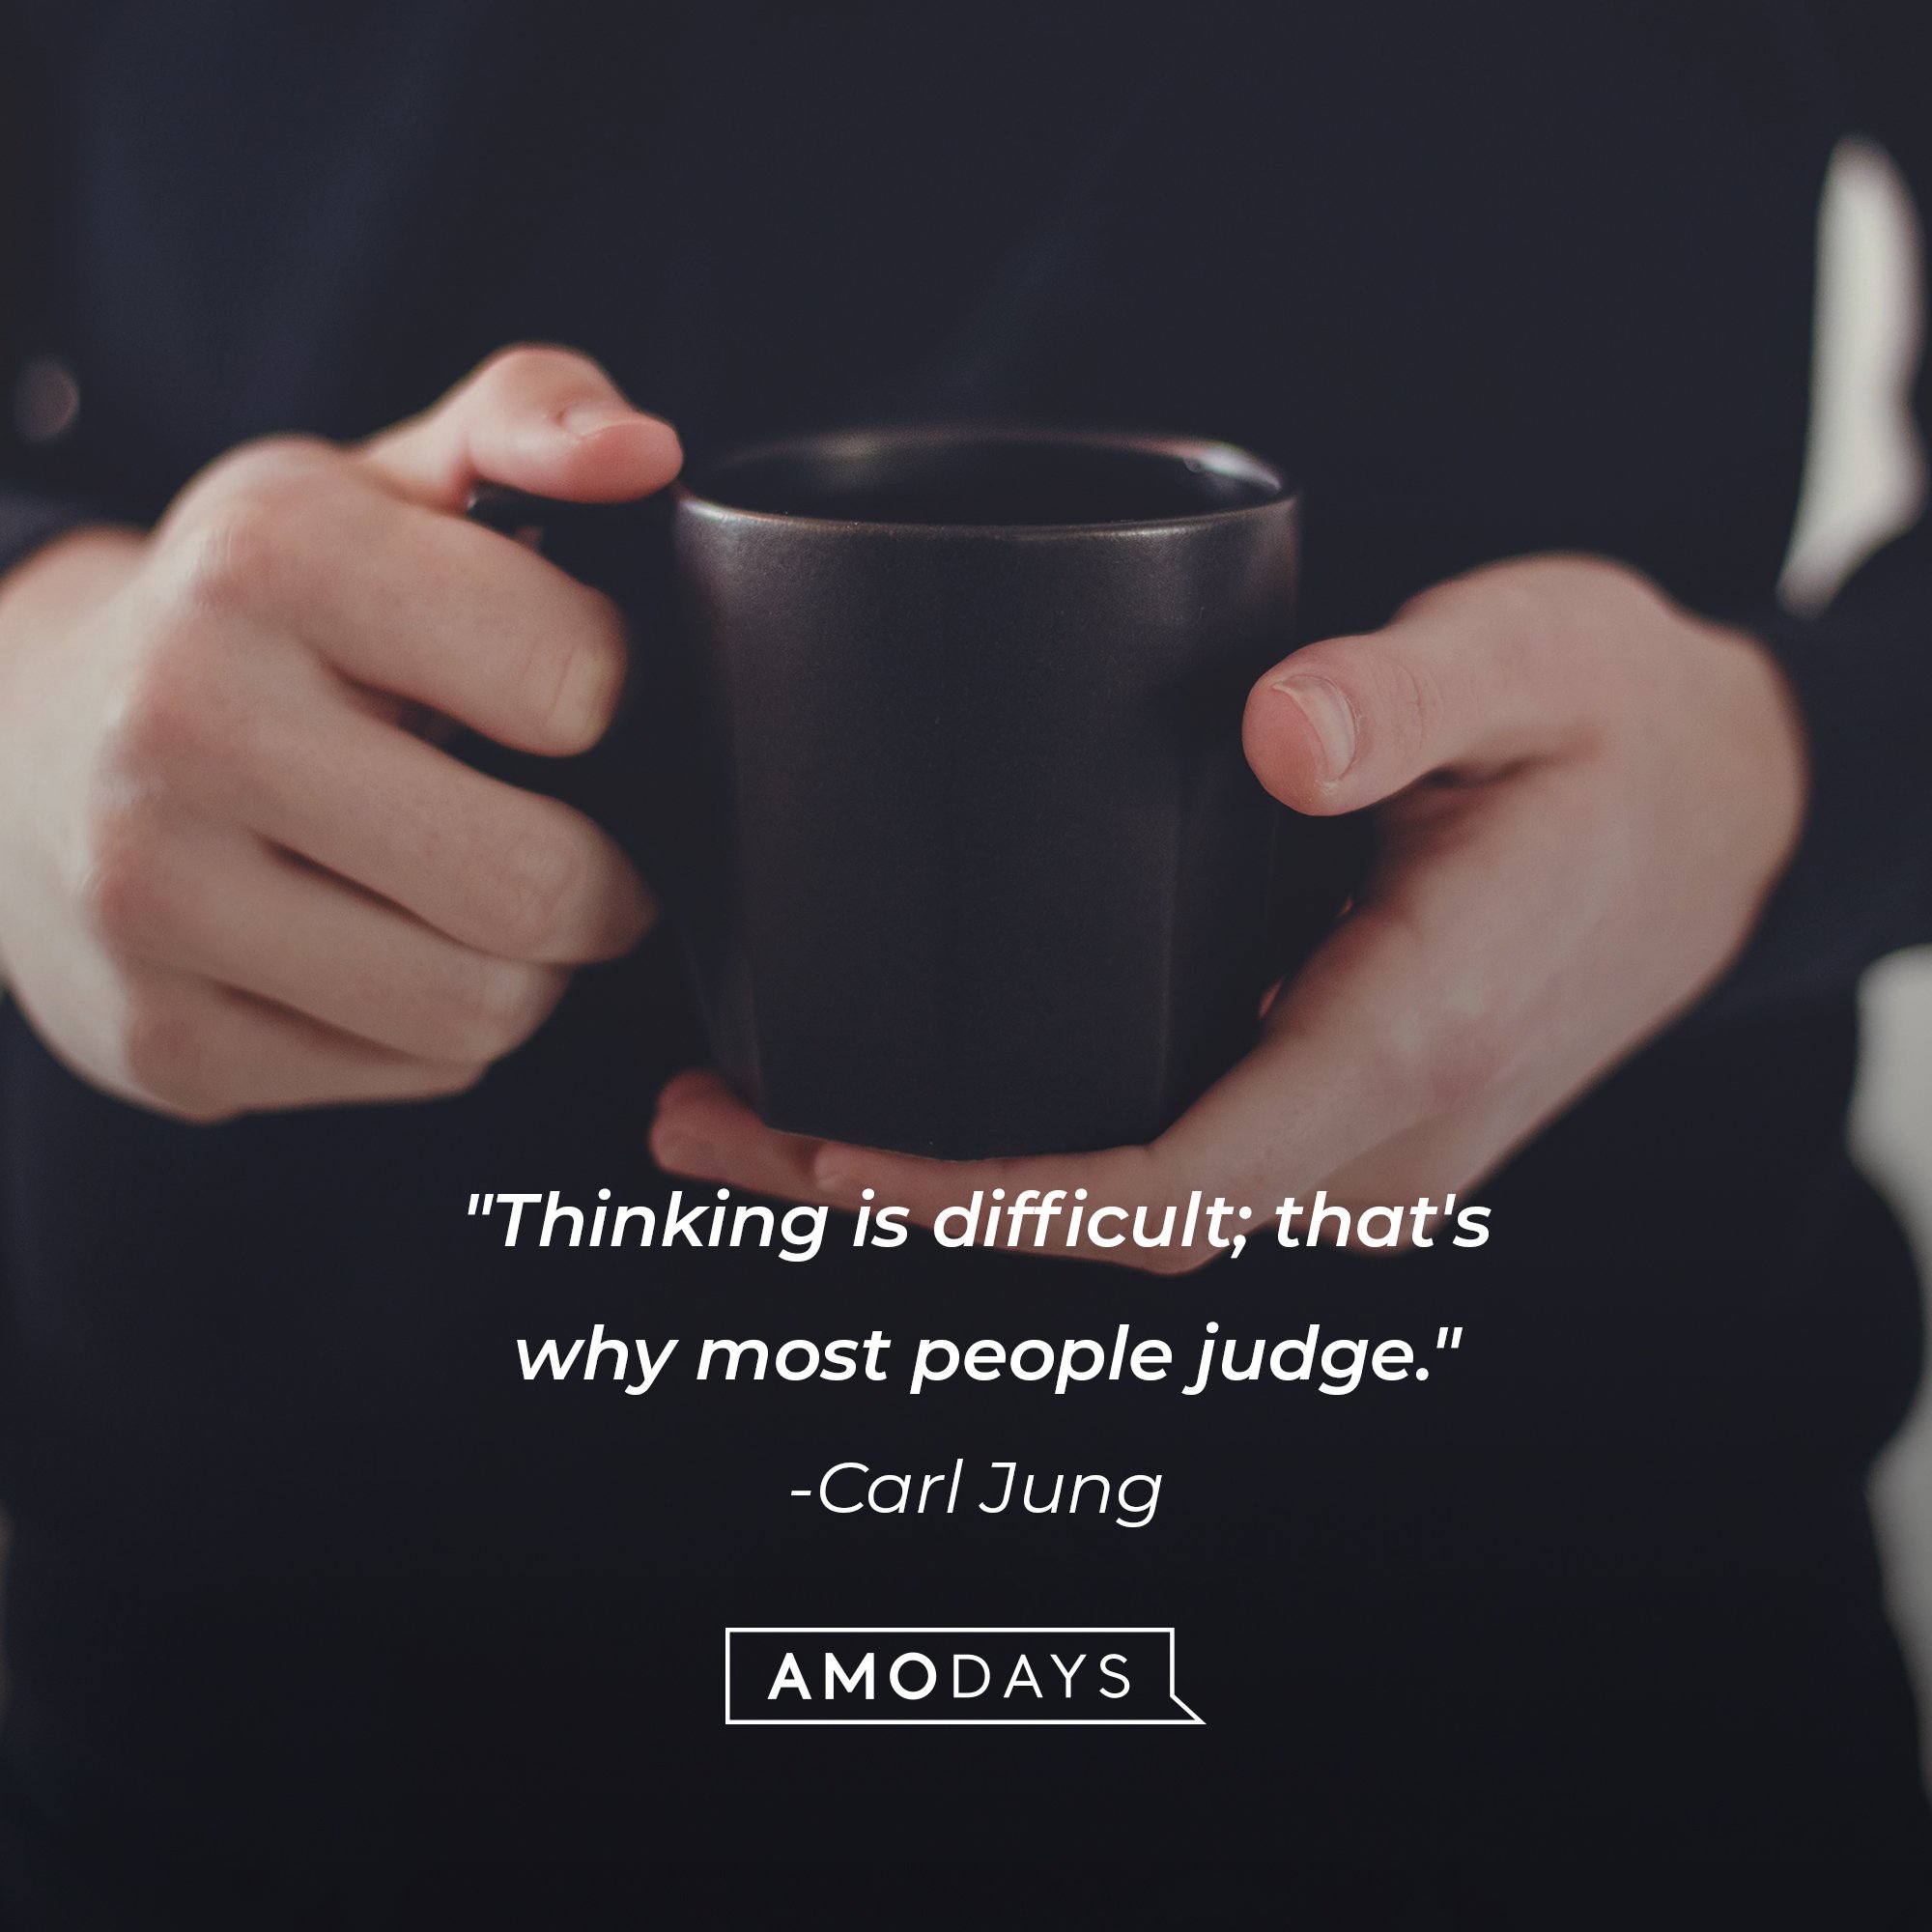 Carl Jung’s quote: "Thinking is difficult; that's why most people judge.” | Image: AmoDays   